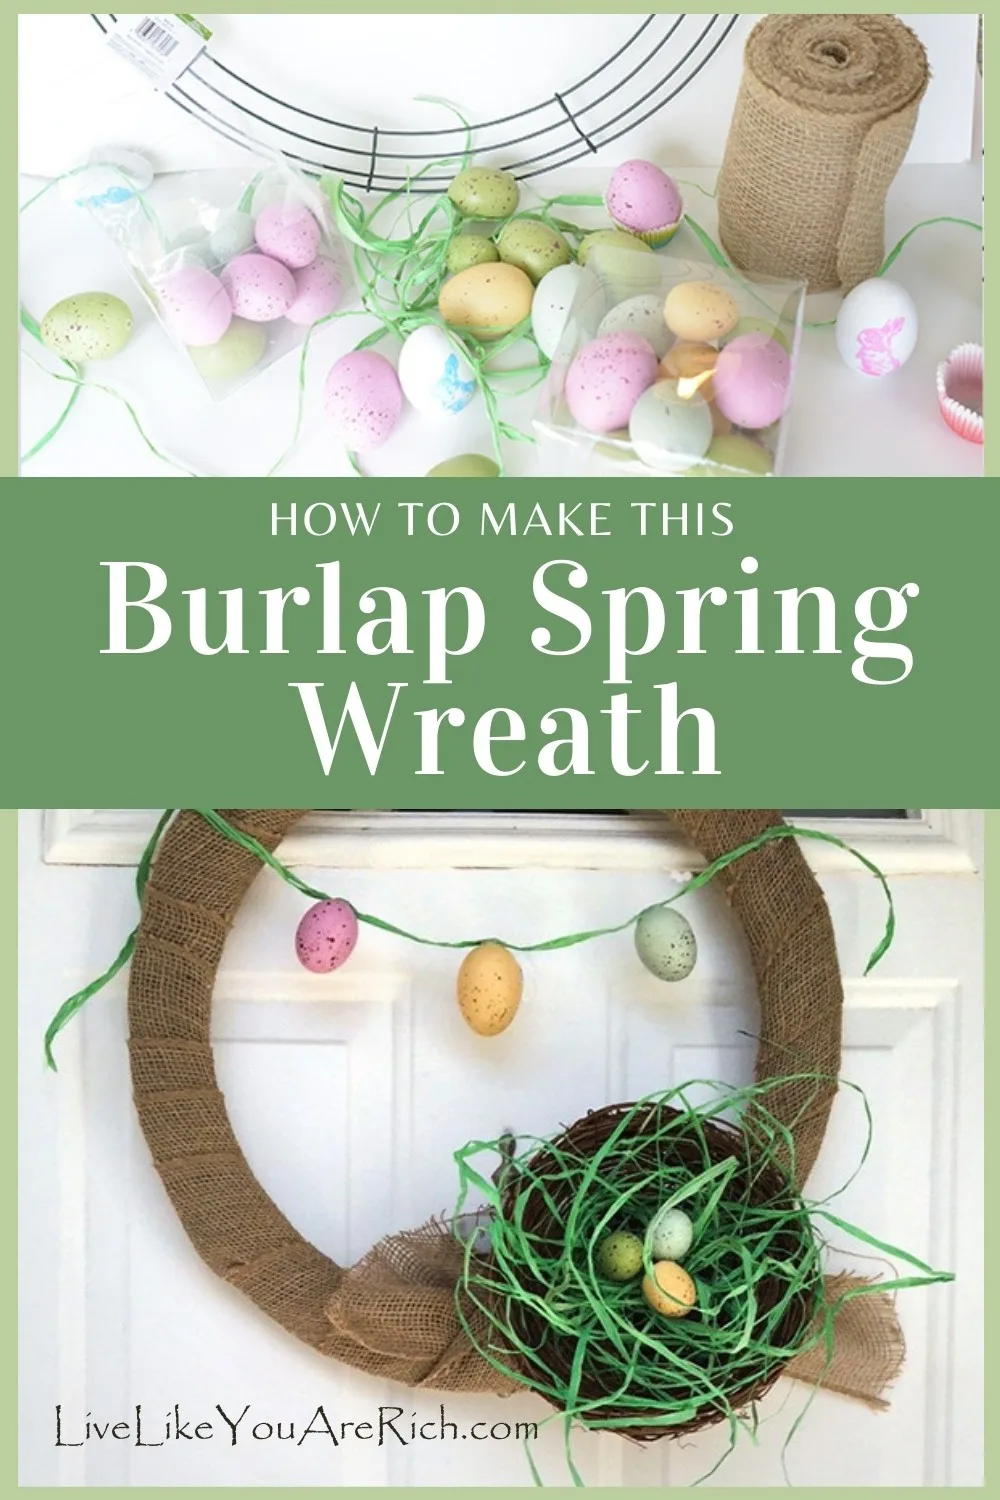 How to Make This Burlap Spring Wreath